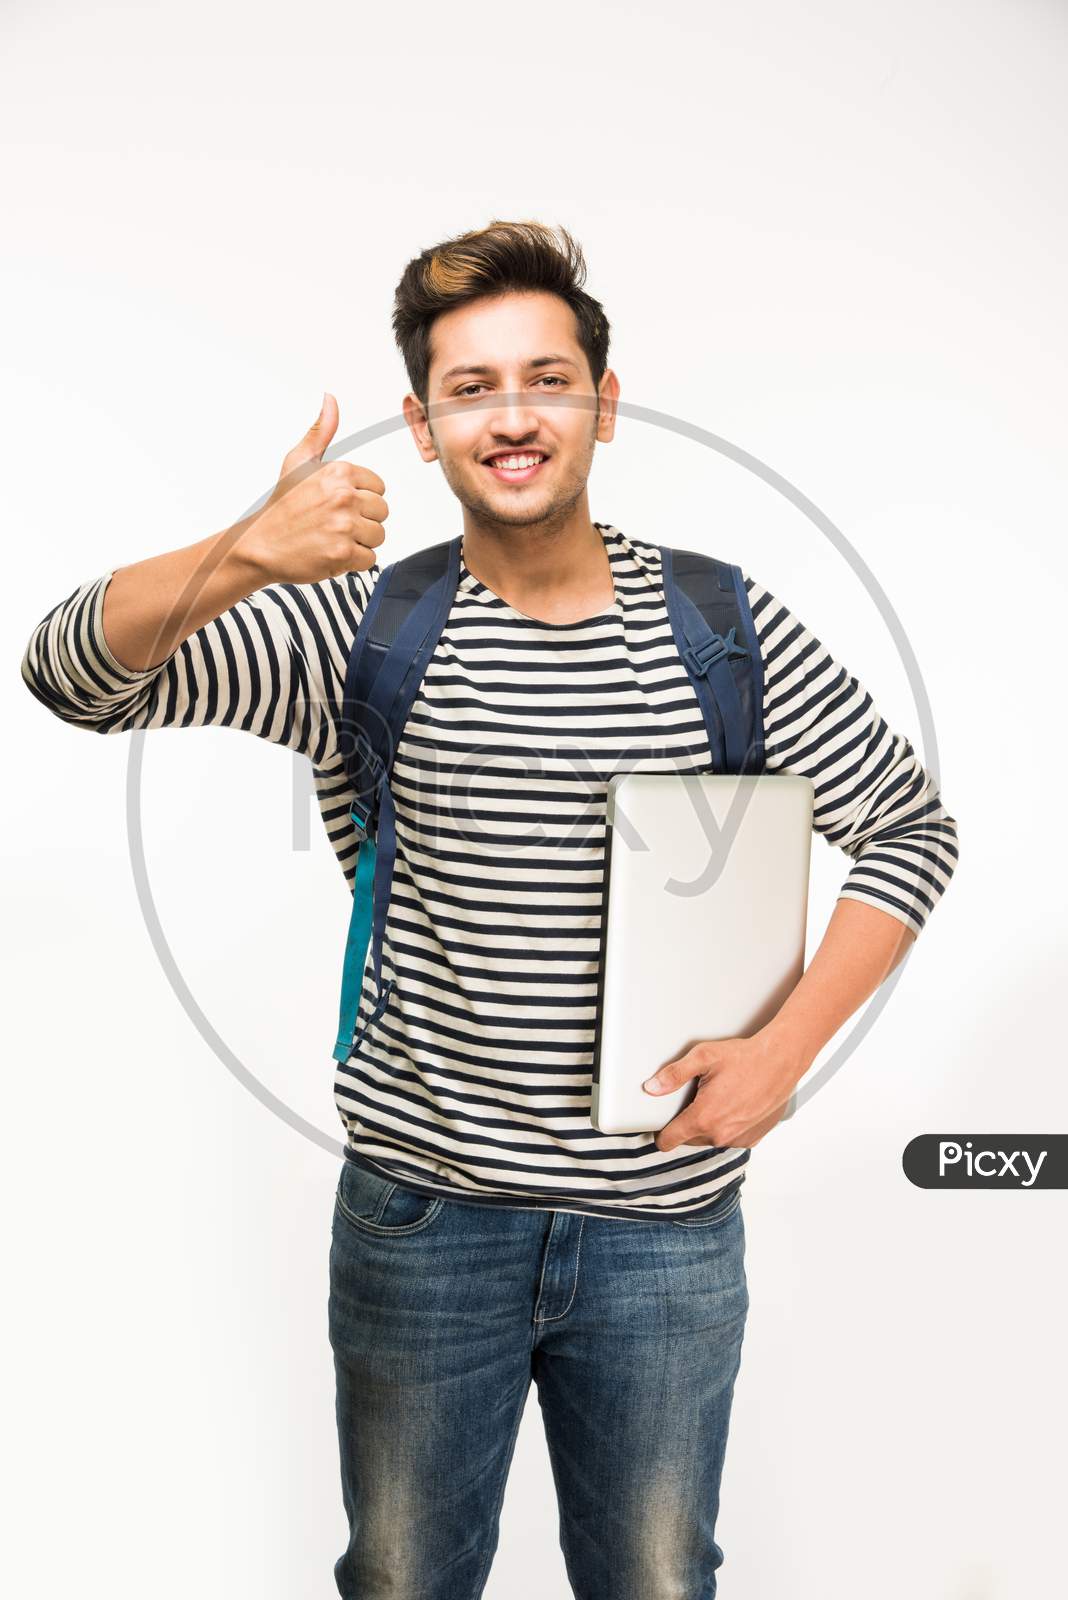 Young male college student standing with bag and books/laptop computer, isolated over white background